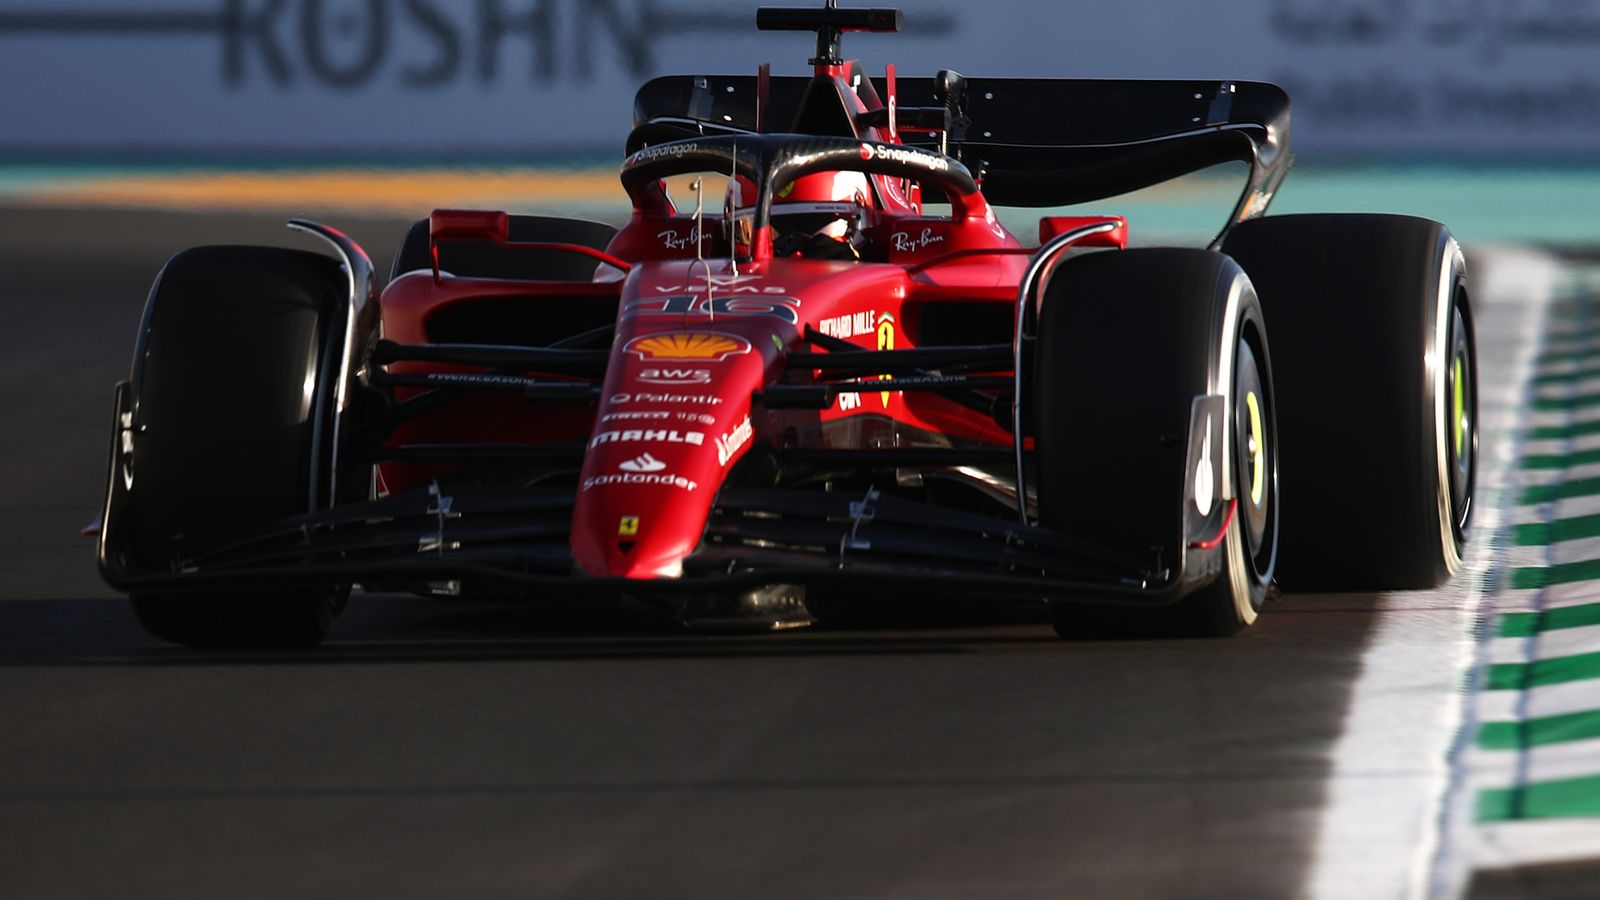 Saudi Arabian GP: Charles Leclerc edges Max Verstappen in Practice One with Mercedes off the pace